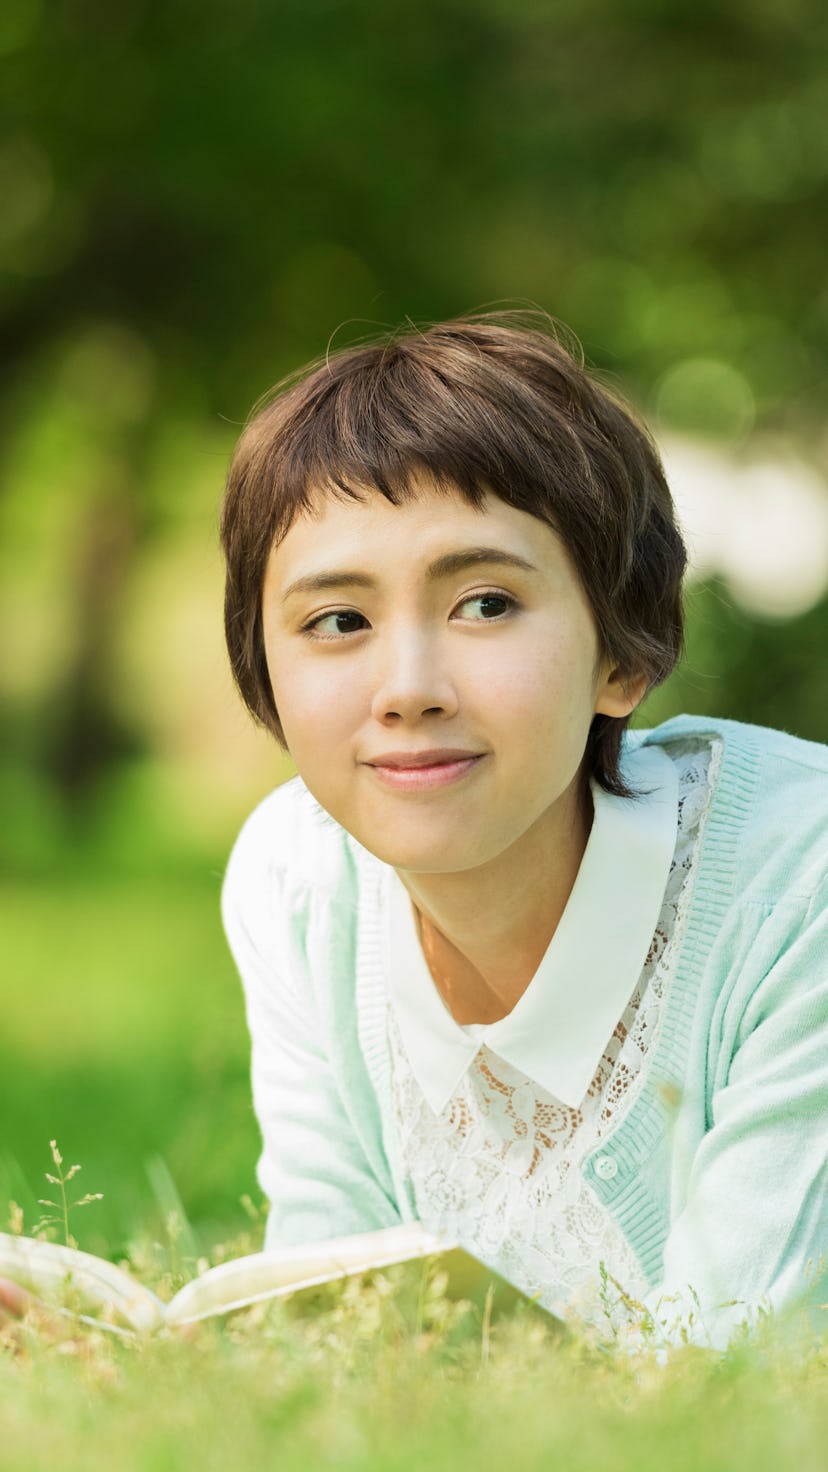 A smiling, femme Asian person with short hair lies in the grass reading a book.